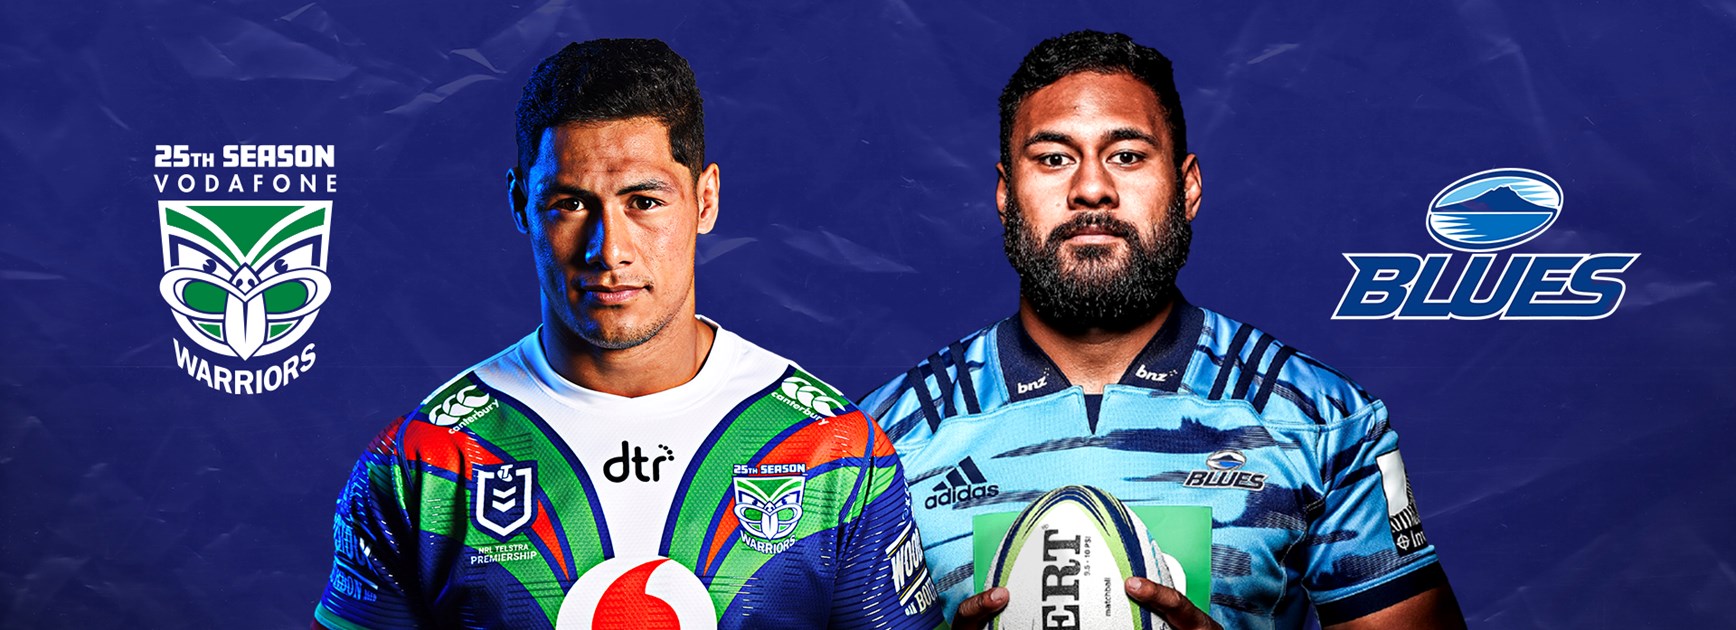 Vodafone Warriors and Blues unique ticket deal for this weekend